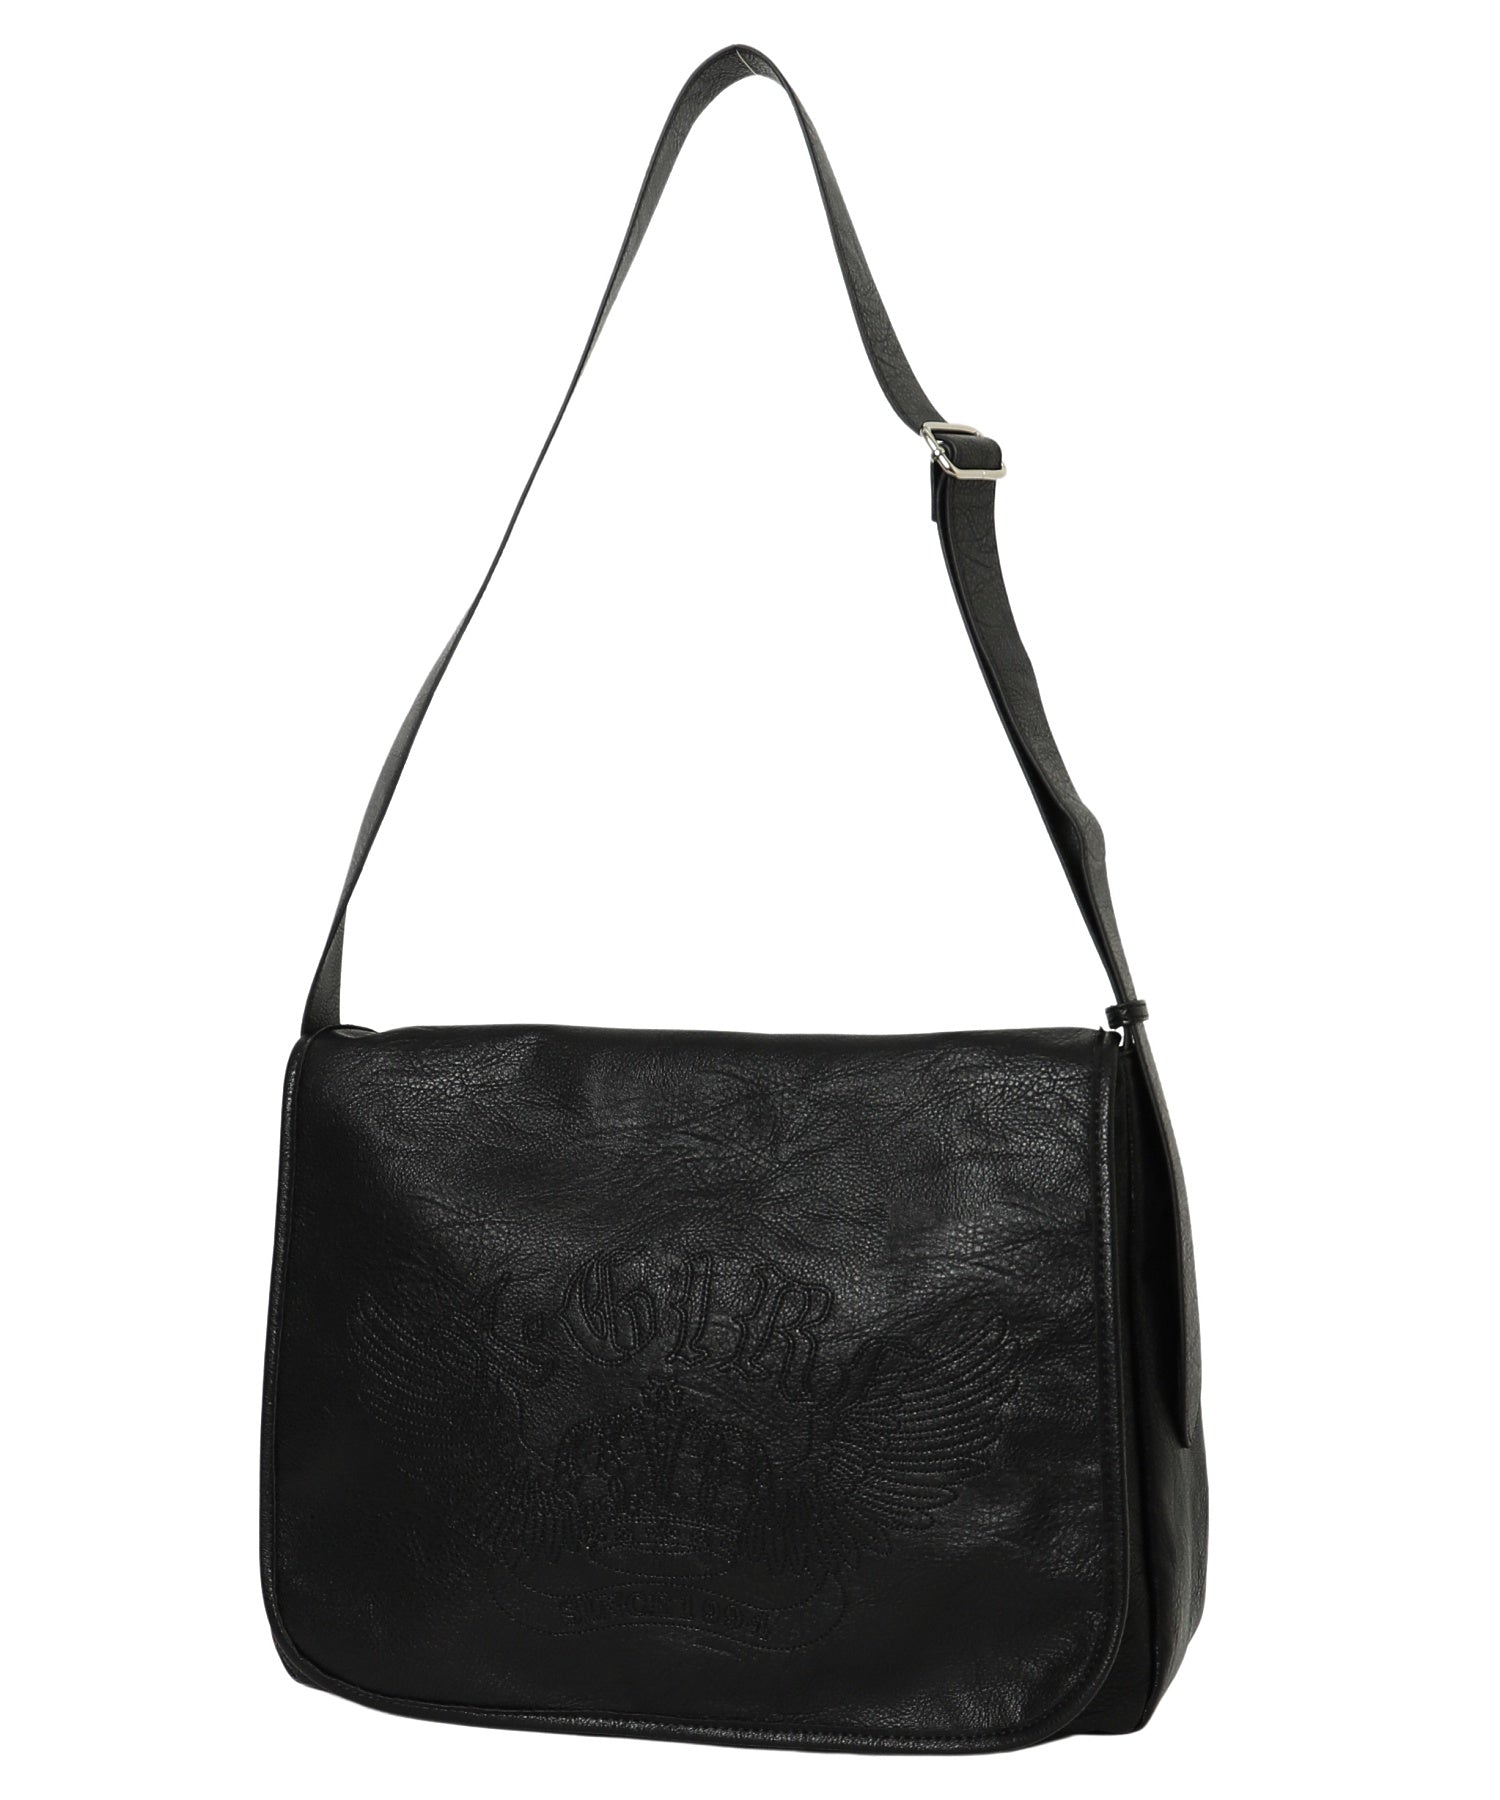 CROWN AND WINGS FAUX LEATHER MESSENGER BAG